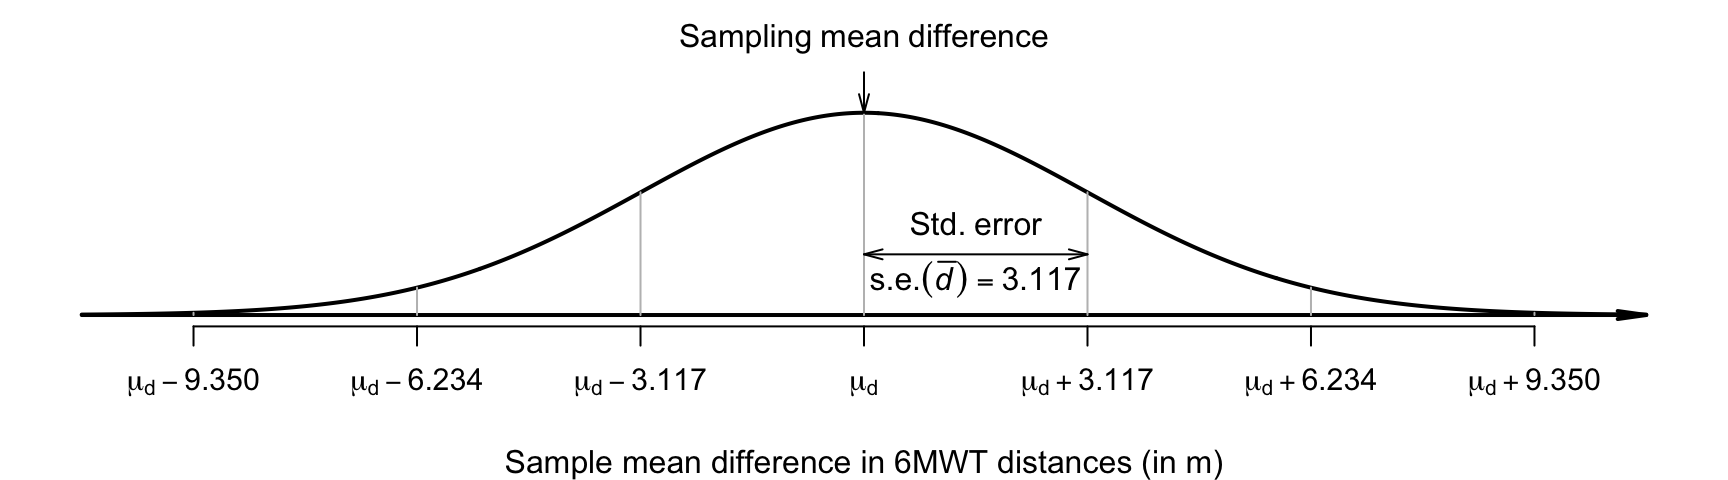 The sampling distribution is a normal distribution; it describes how the sample mean difference between the 6MWT distances varies in samples of size $n = 50$